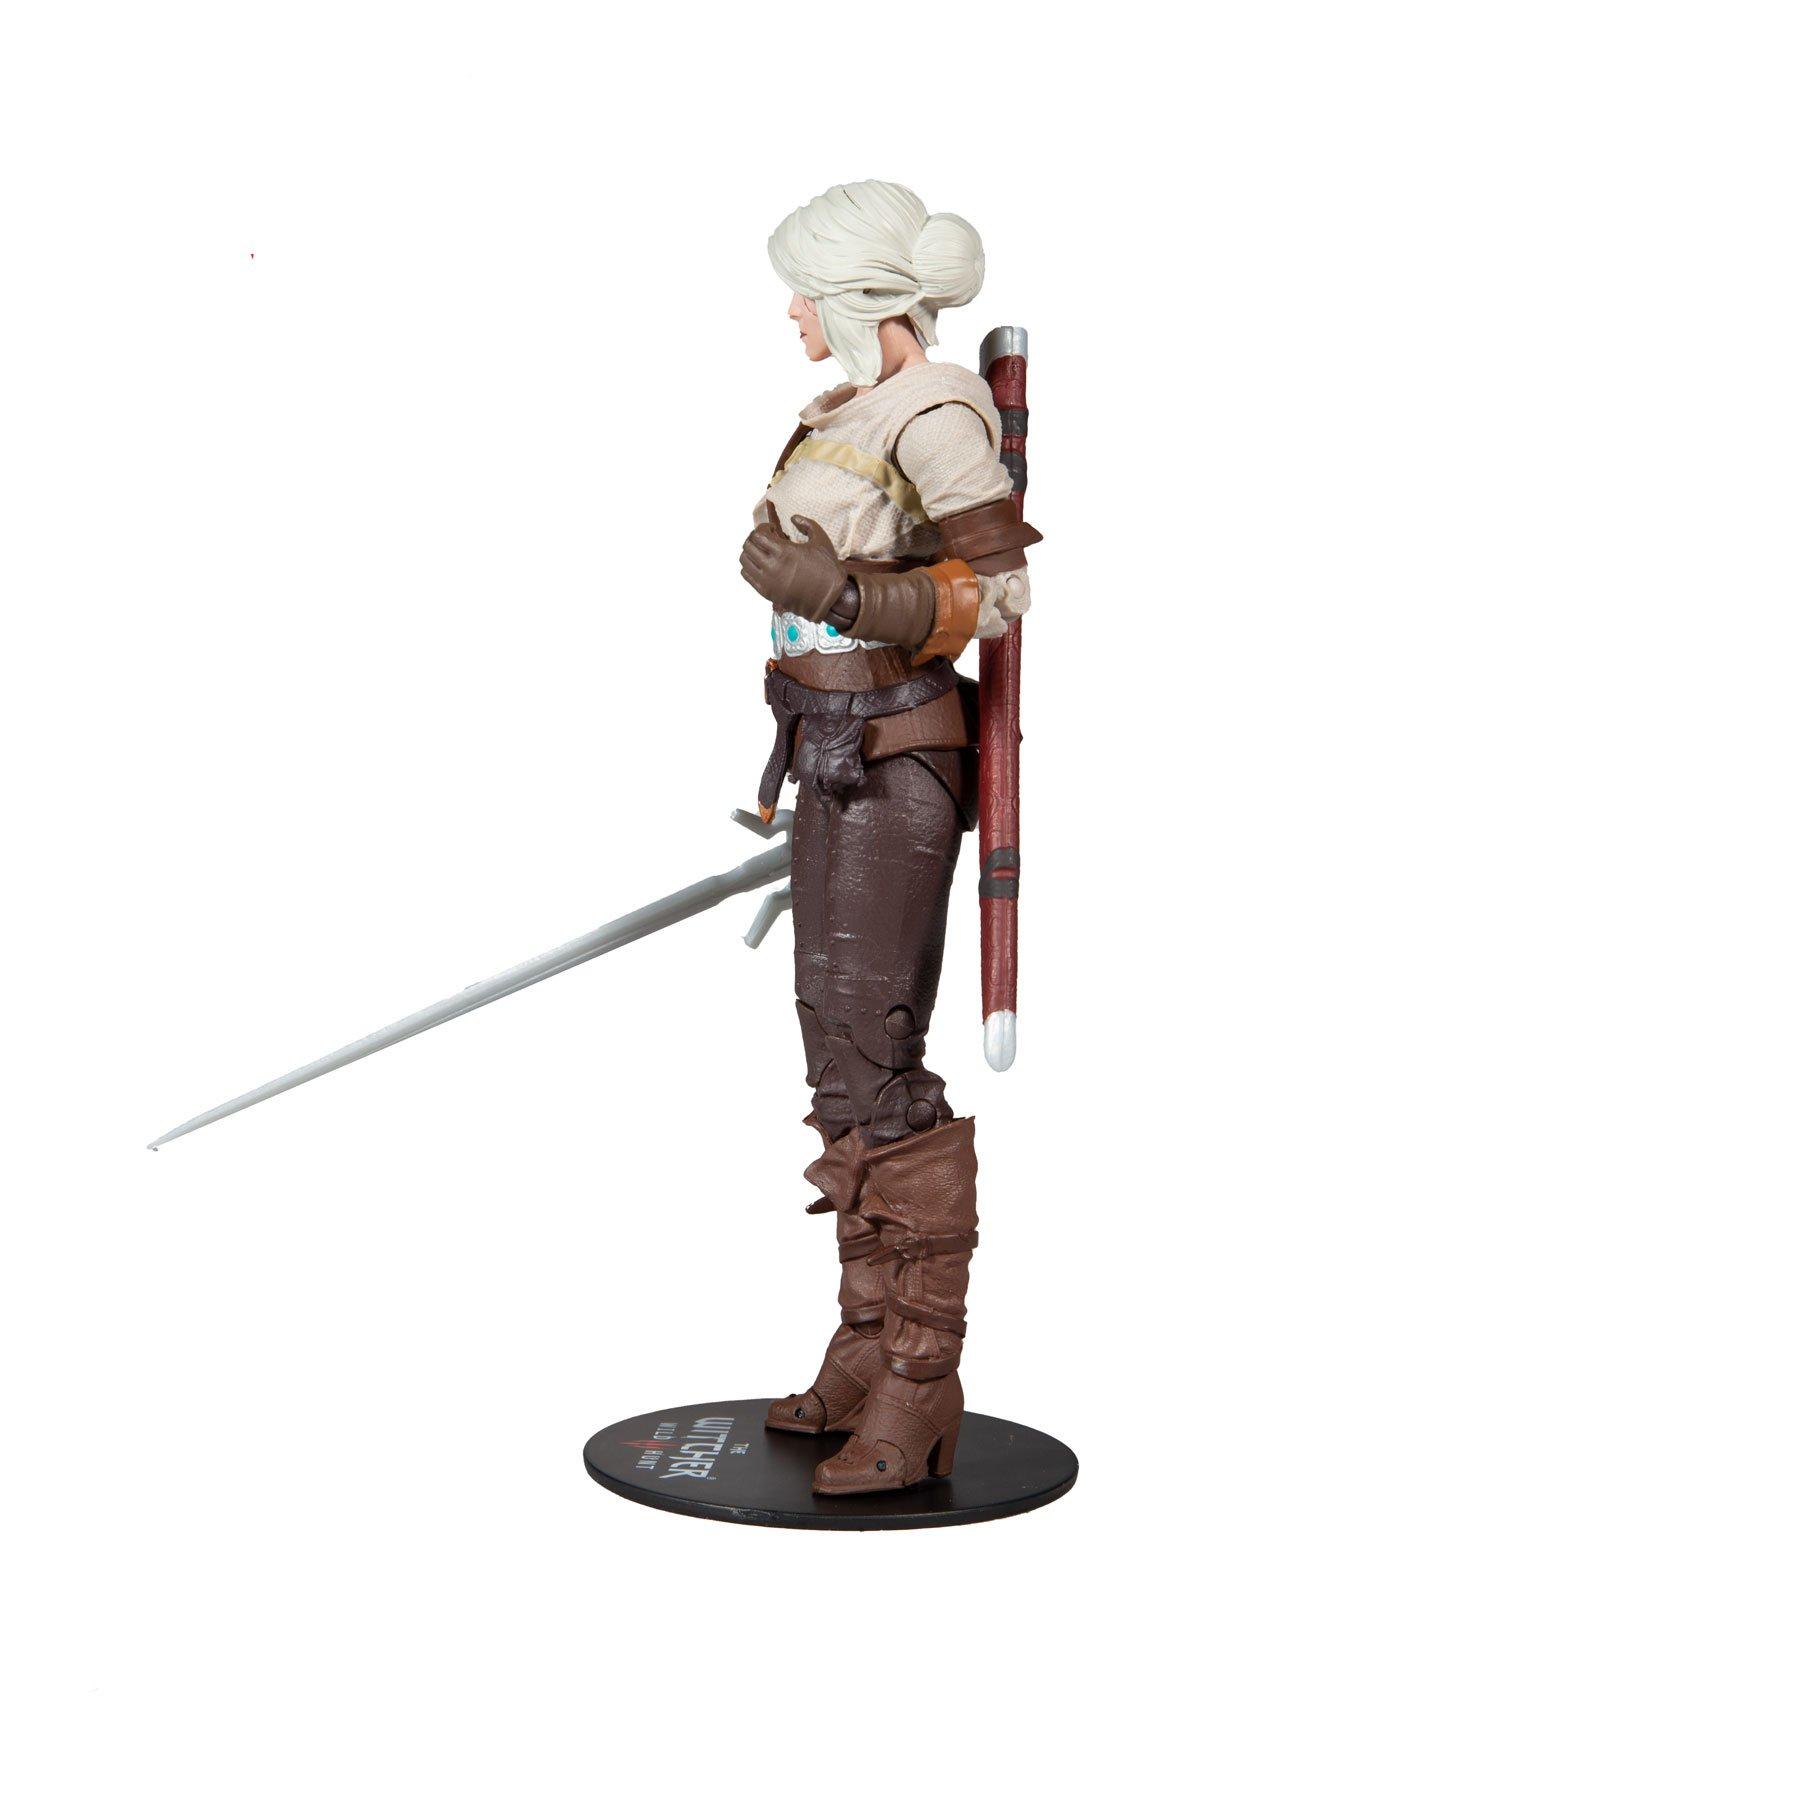 list item 2 of 10 McFarlane Toys The Witcher Ciri Wave 2 7-in Action Figure